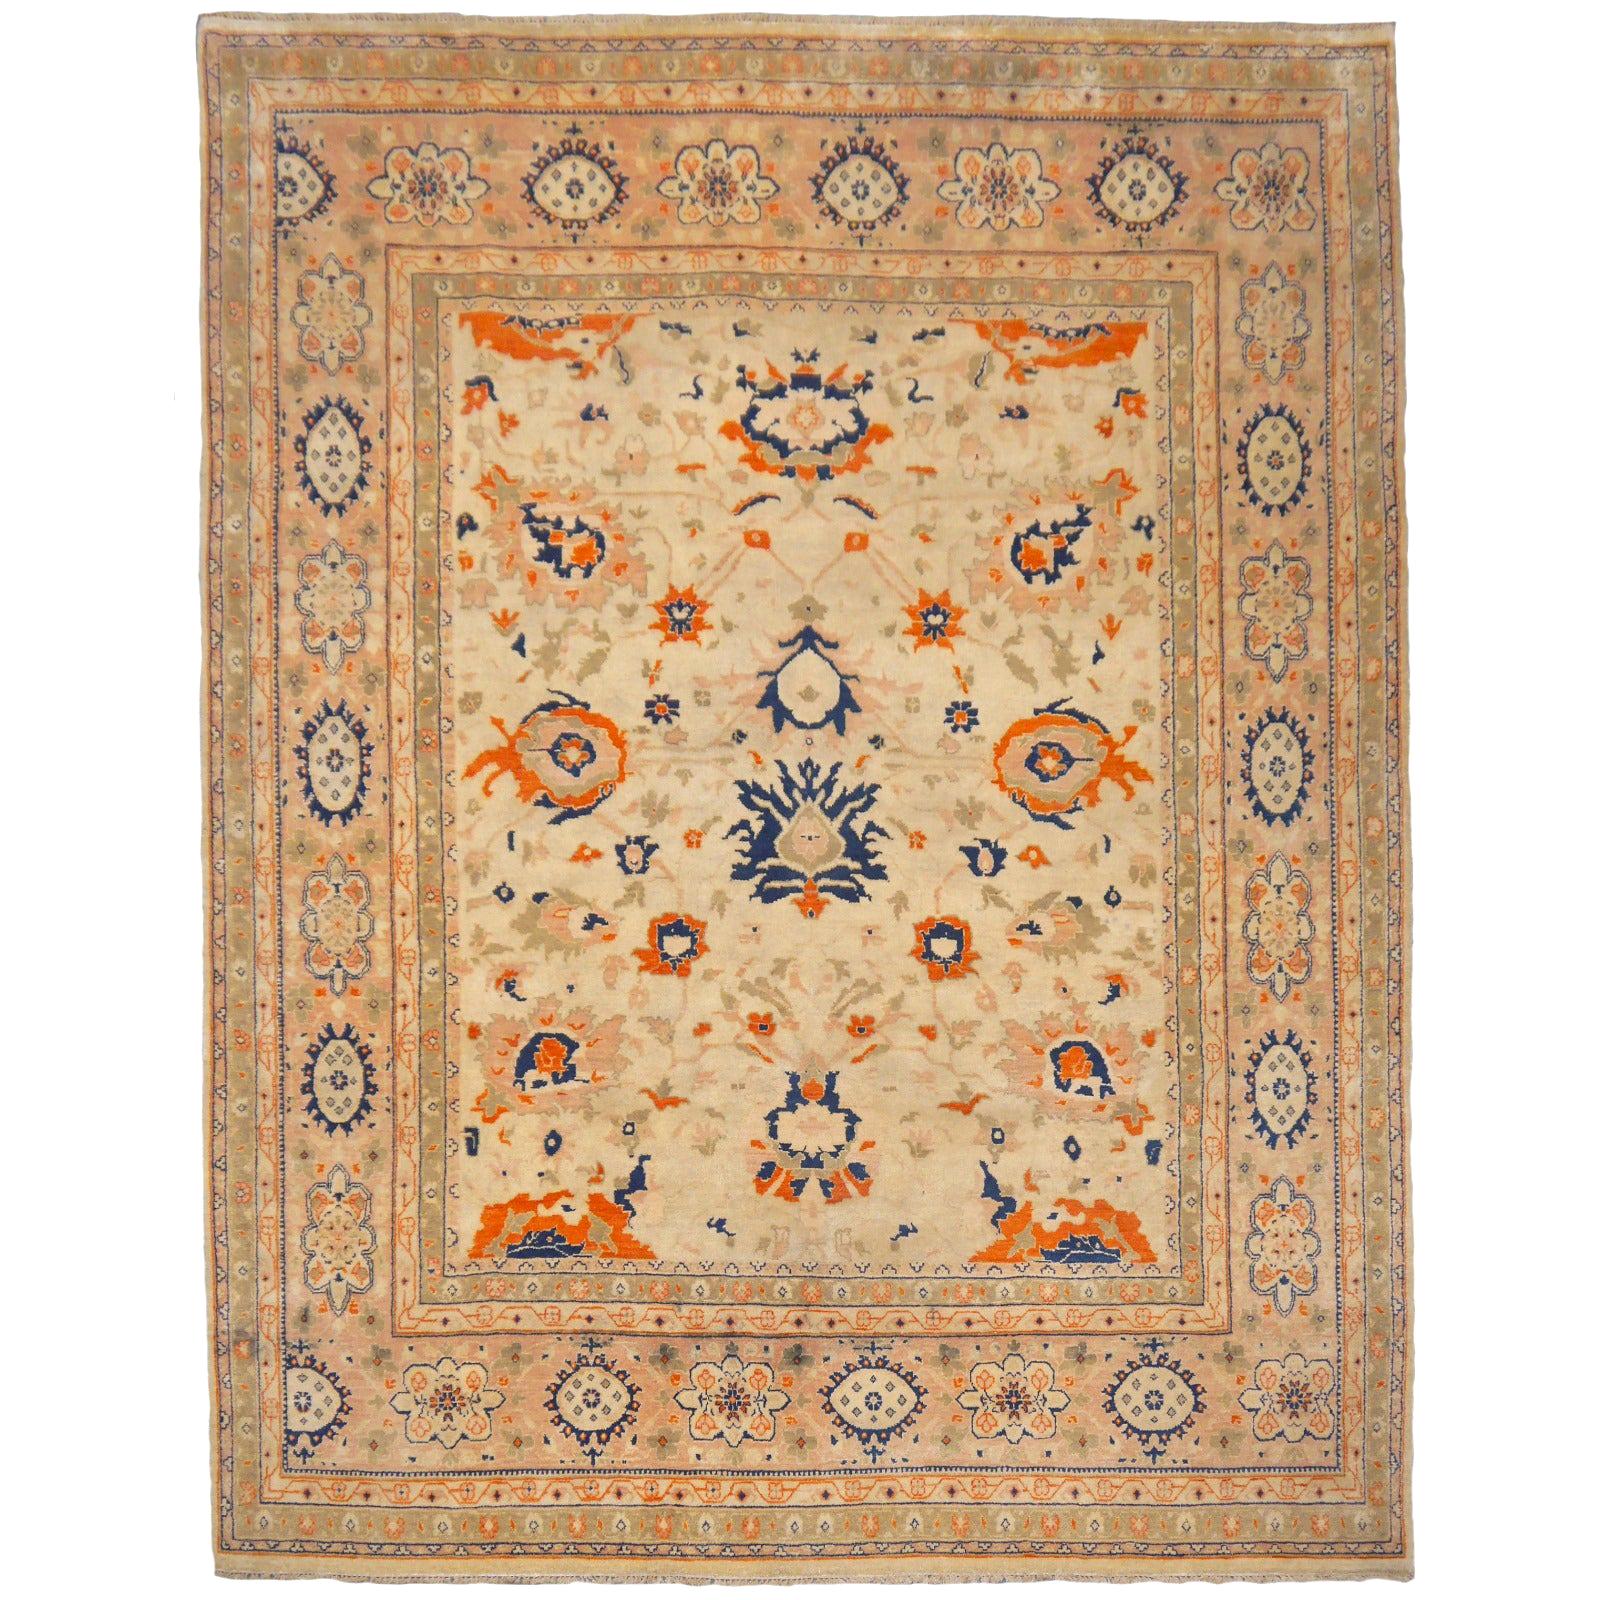 8 x 10 ft Sultanabad Mahal Design Rug Hand Knotted Wool Pile